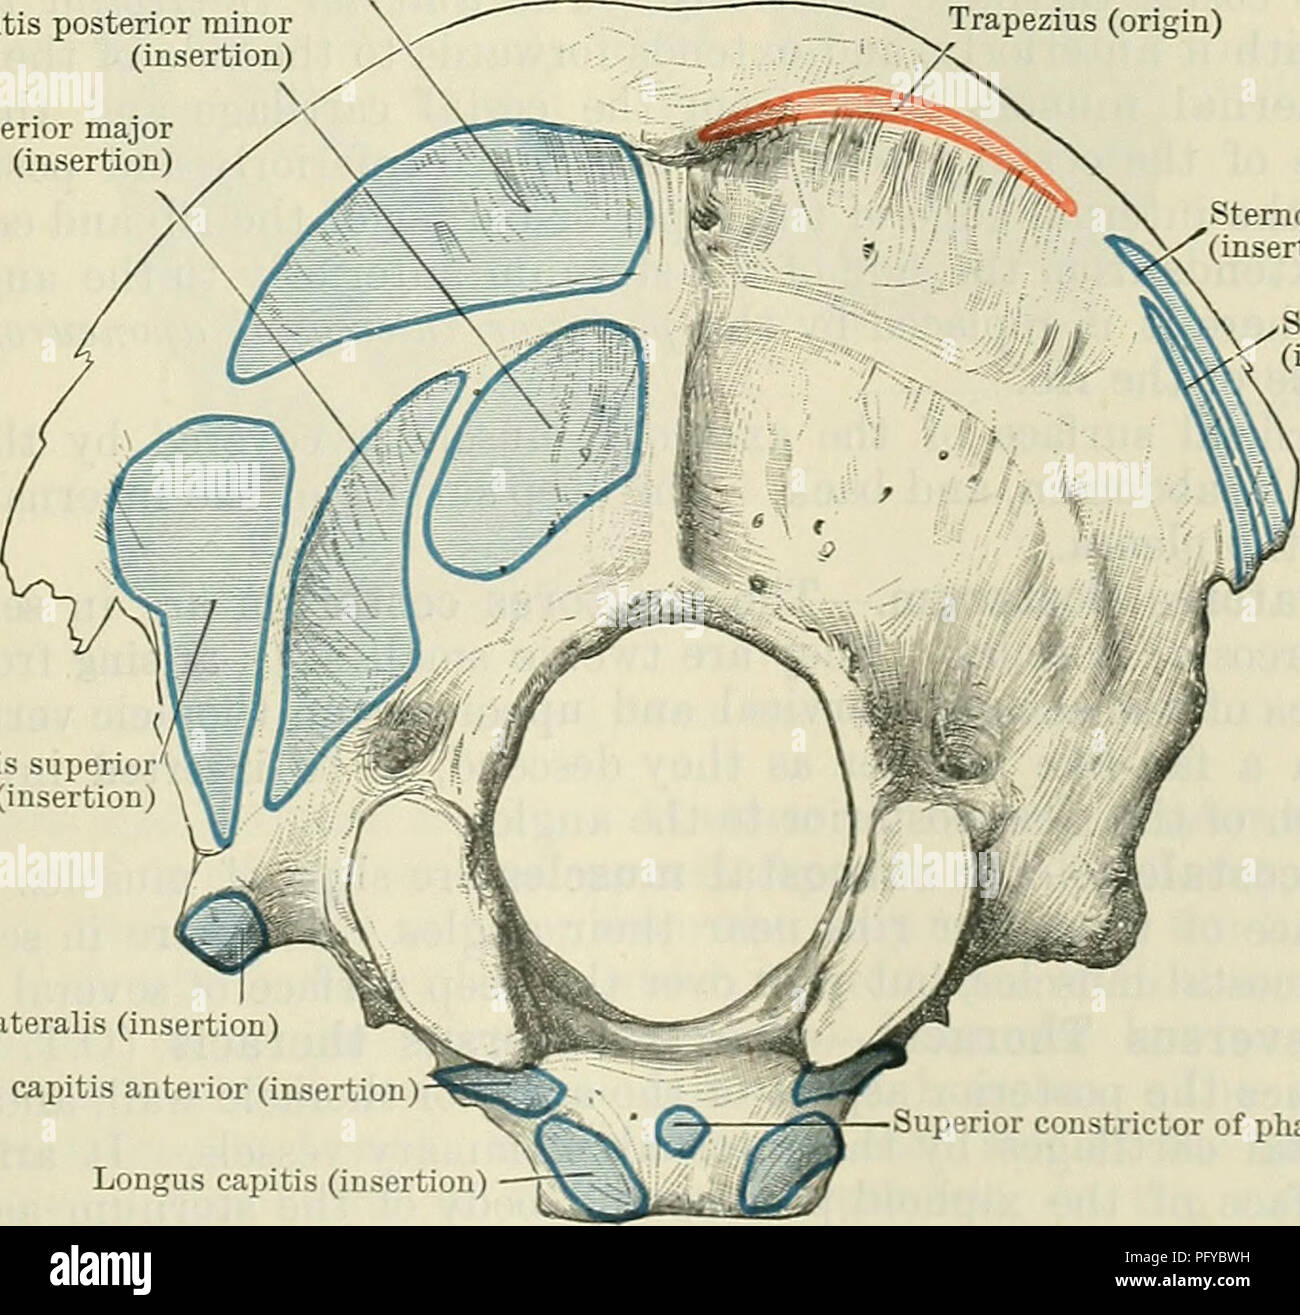 . Cunningham's Text-book of anatomy. Anatomy. CALENUS ANTERIOR —LONGUS CAPITIS Attached to anterior ^-tubercles of transverse processes —-LONGUS COLLI C LONGISSIMUS CAPITIS Attached to Semispinalis capitis articular^  , processes Semispinalis cervicis I MULTIFIDUS Fig. 416.—Scheme of Muscular Attachments to Cervical Vertebra. The vertical portion of the muscle arises from the bodies of the first three thoracic and the last three cervical vertebrae. Passing vertically upwards, it is inserted into the bodies of the second, third, and fourth cervical vertebrae. Semispinalis capitis (insertion) R Stock Photo